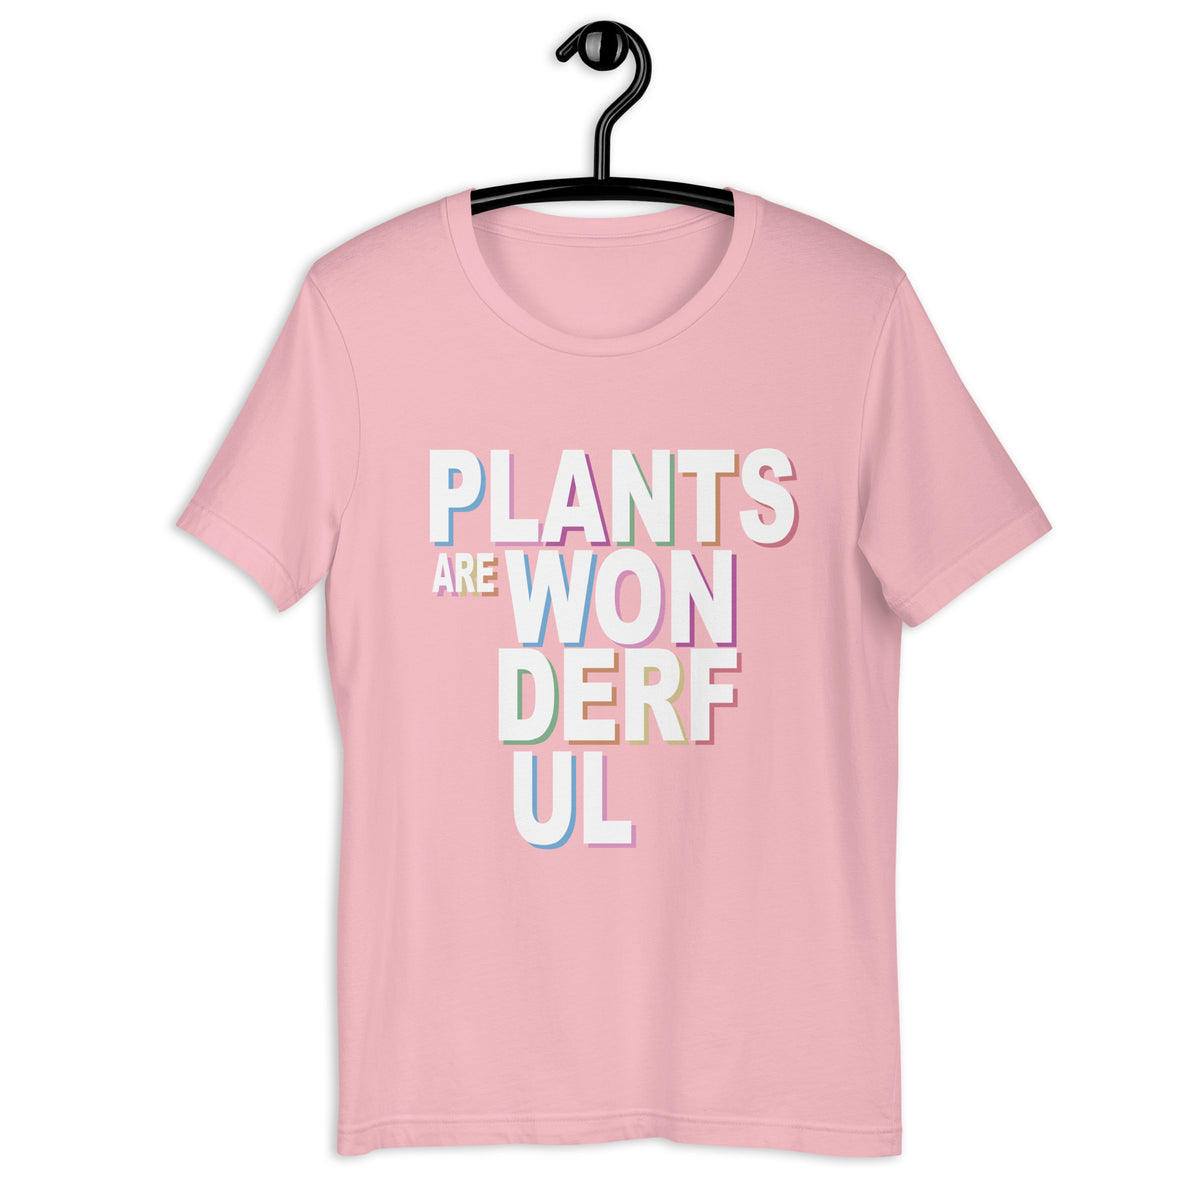 PLANTS ARE WONDERFUL Colored t-shirt